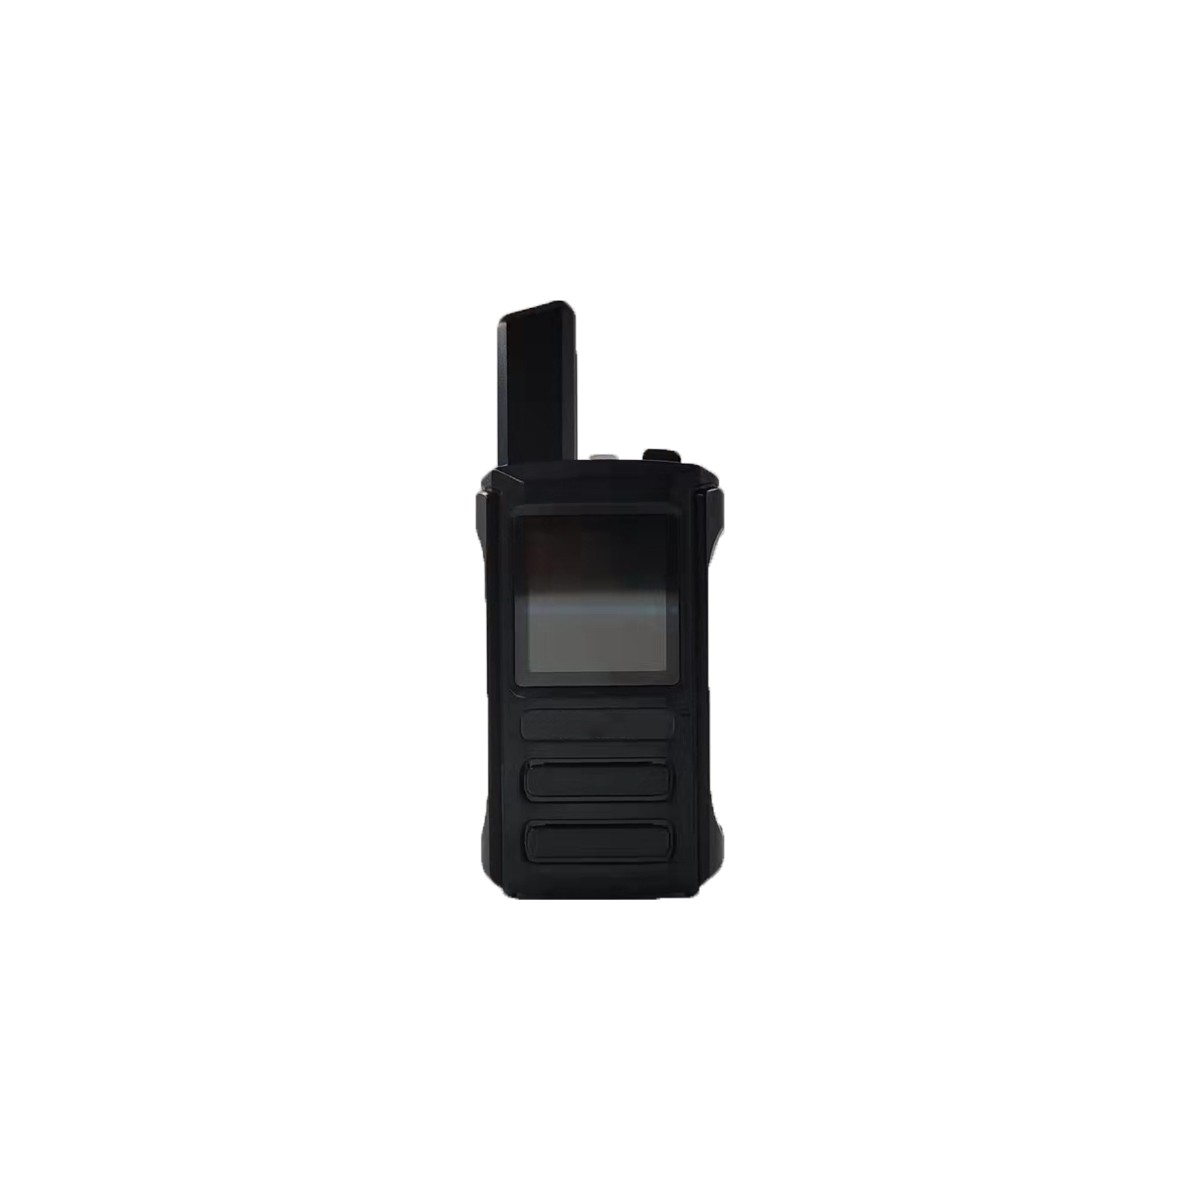 Rete QYT 4g Android 100 km walkie talkie ptt reale NH-20
